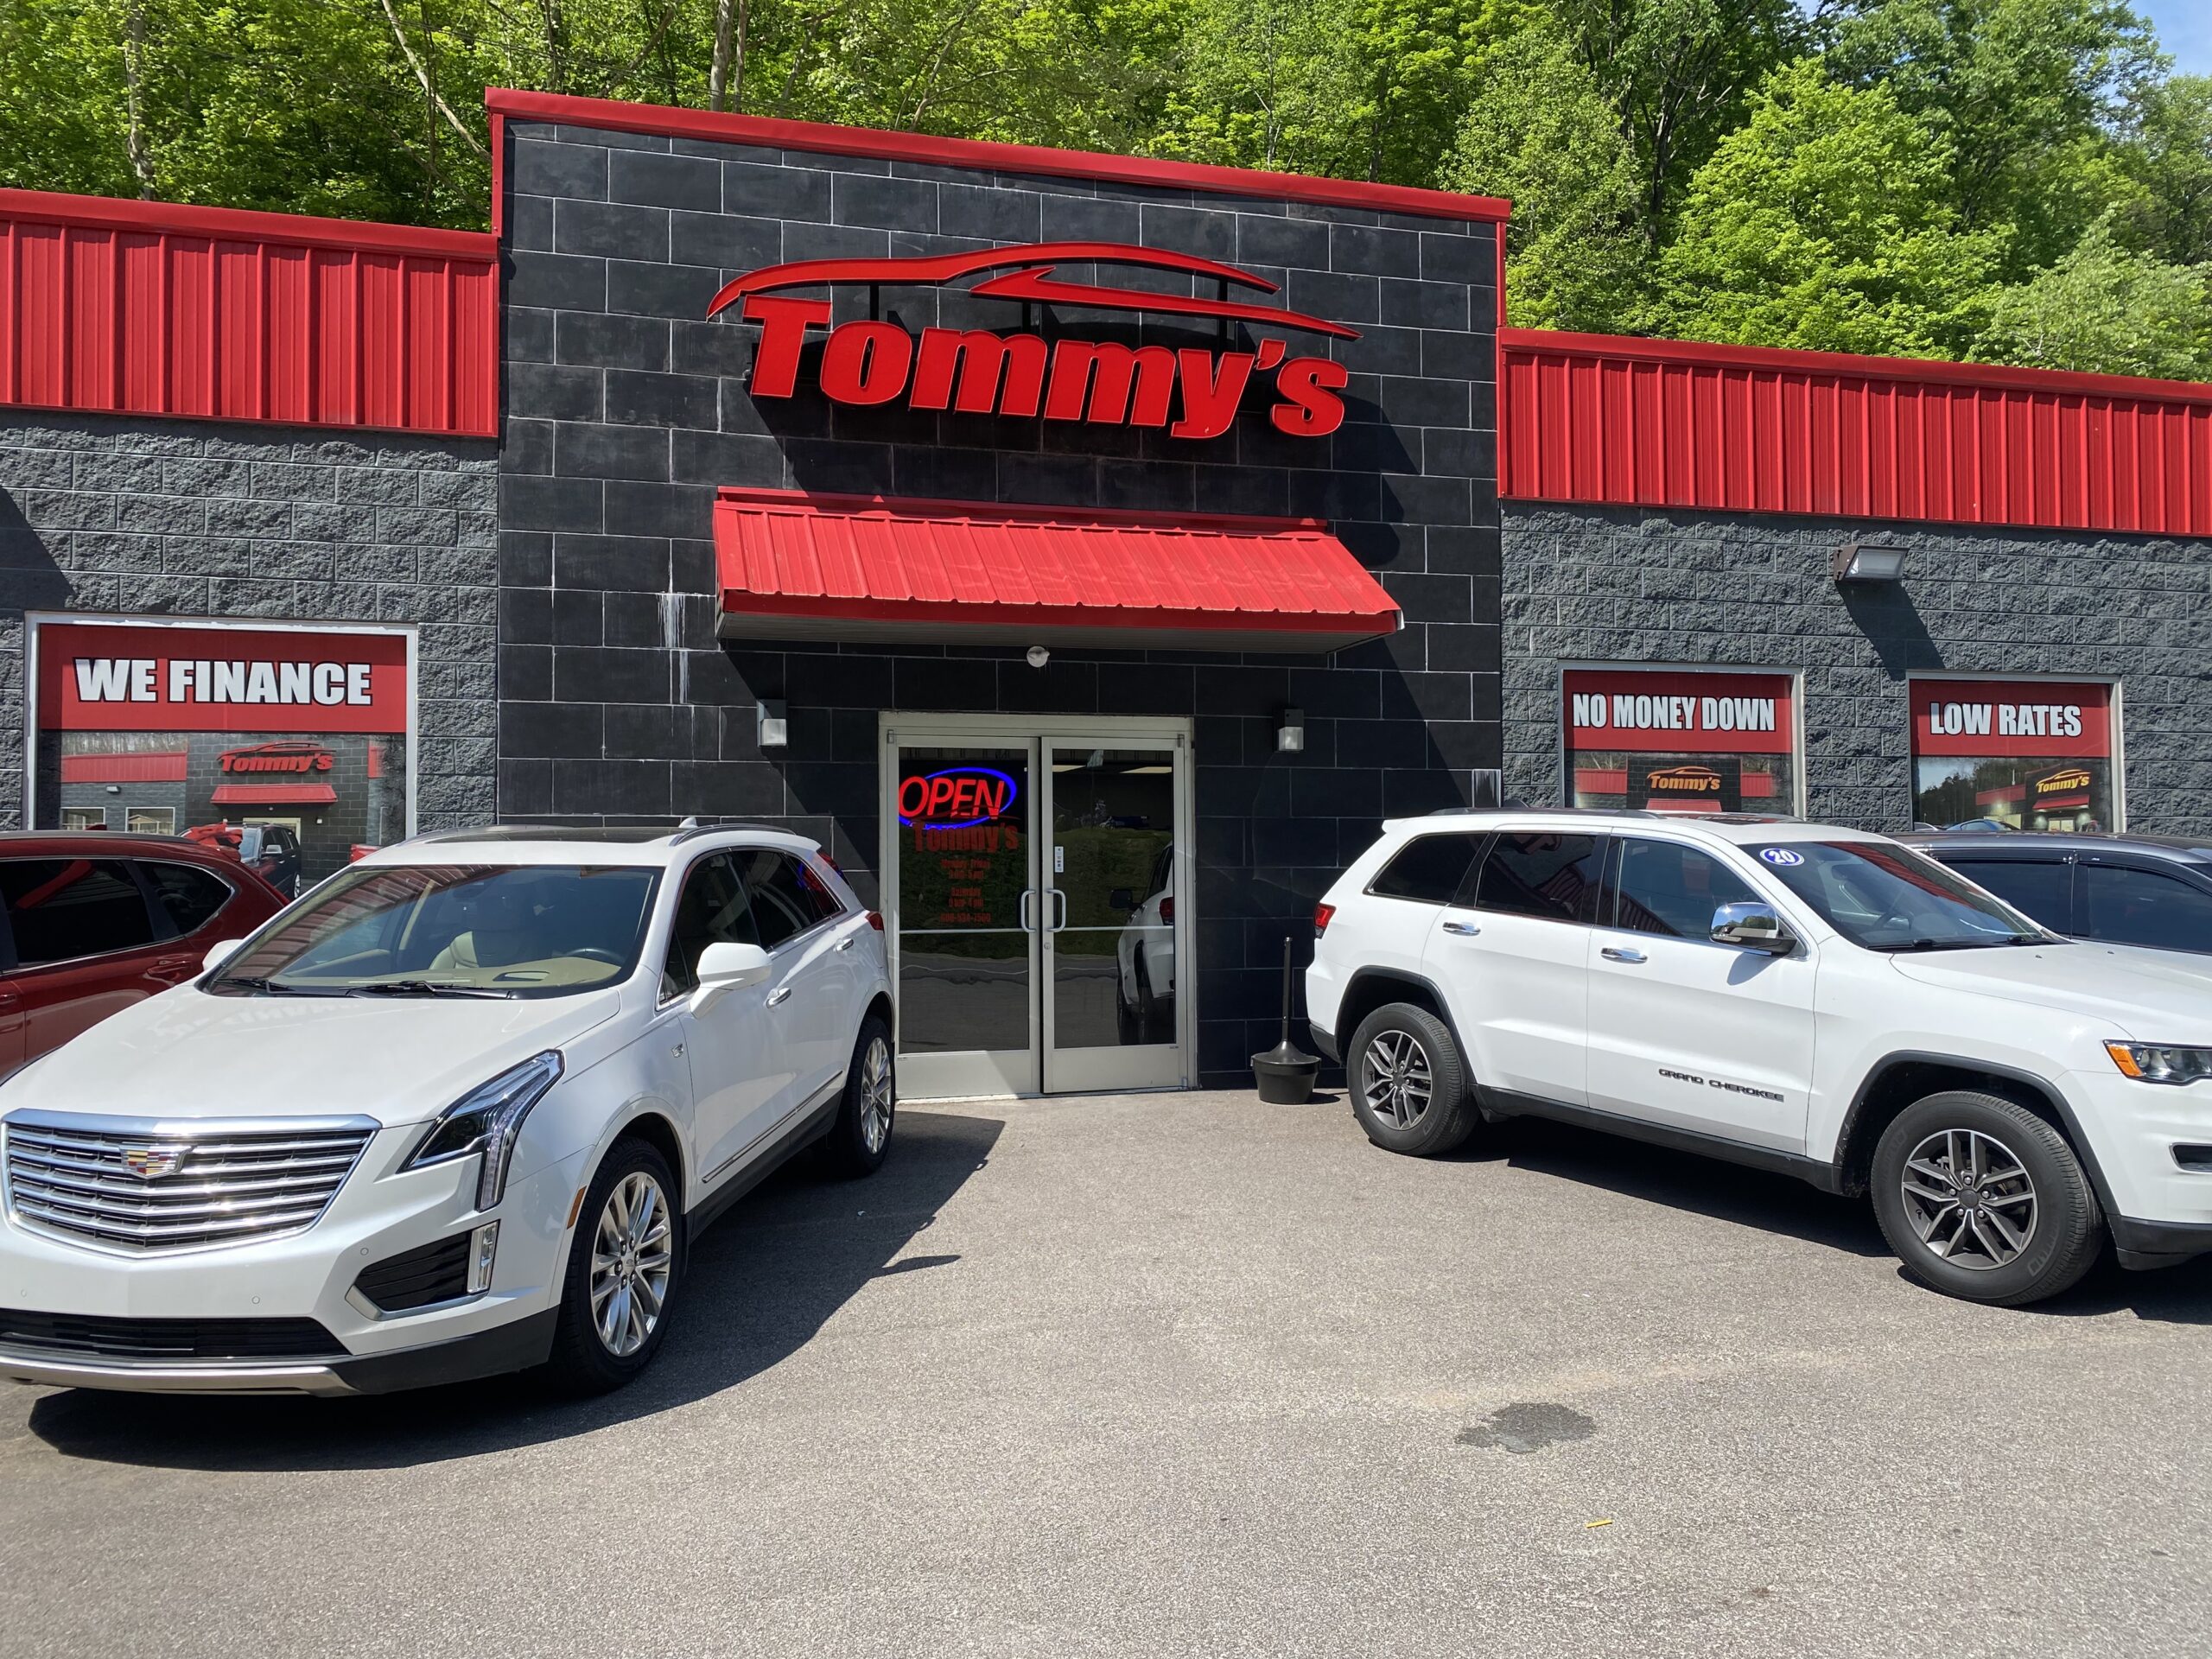 Tommy’s is one of Eastern Kentucky’s largest car dealers